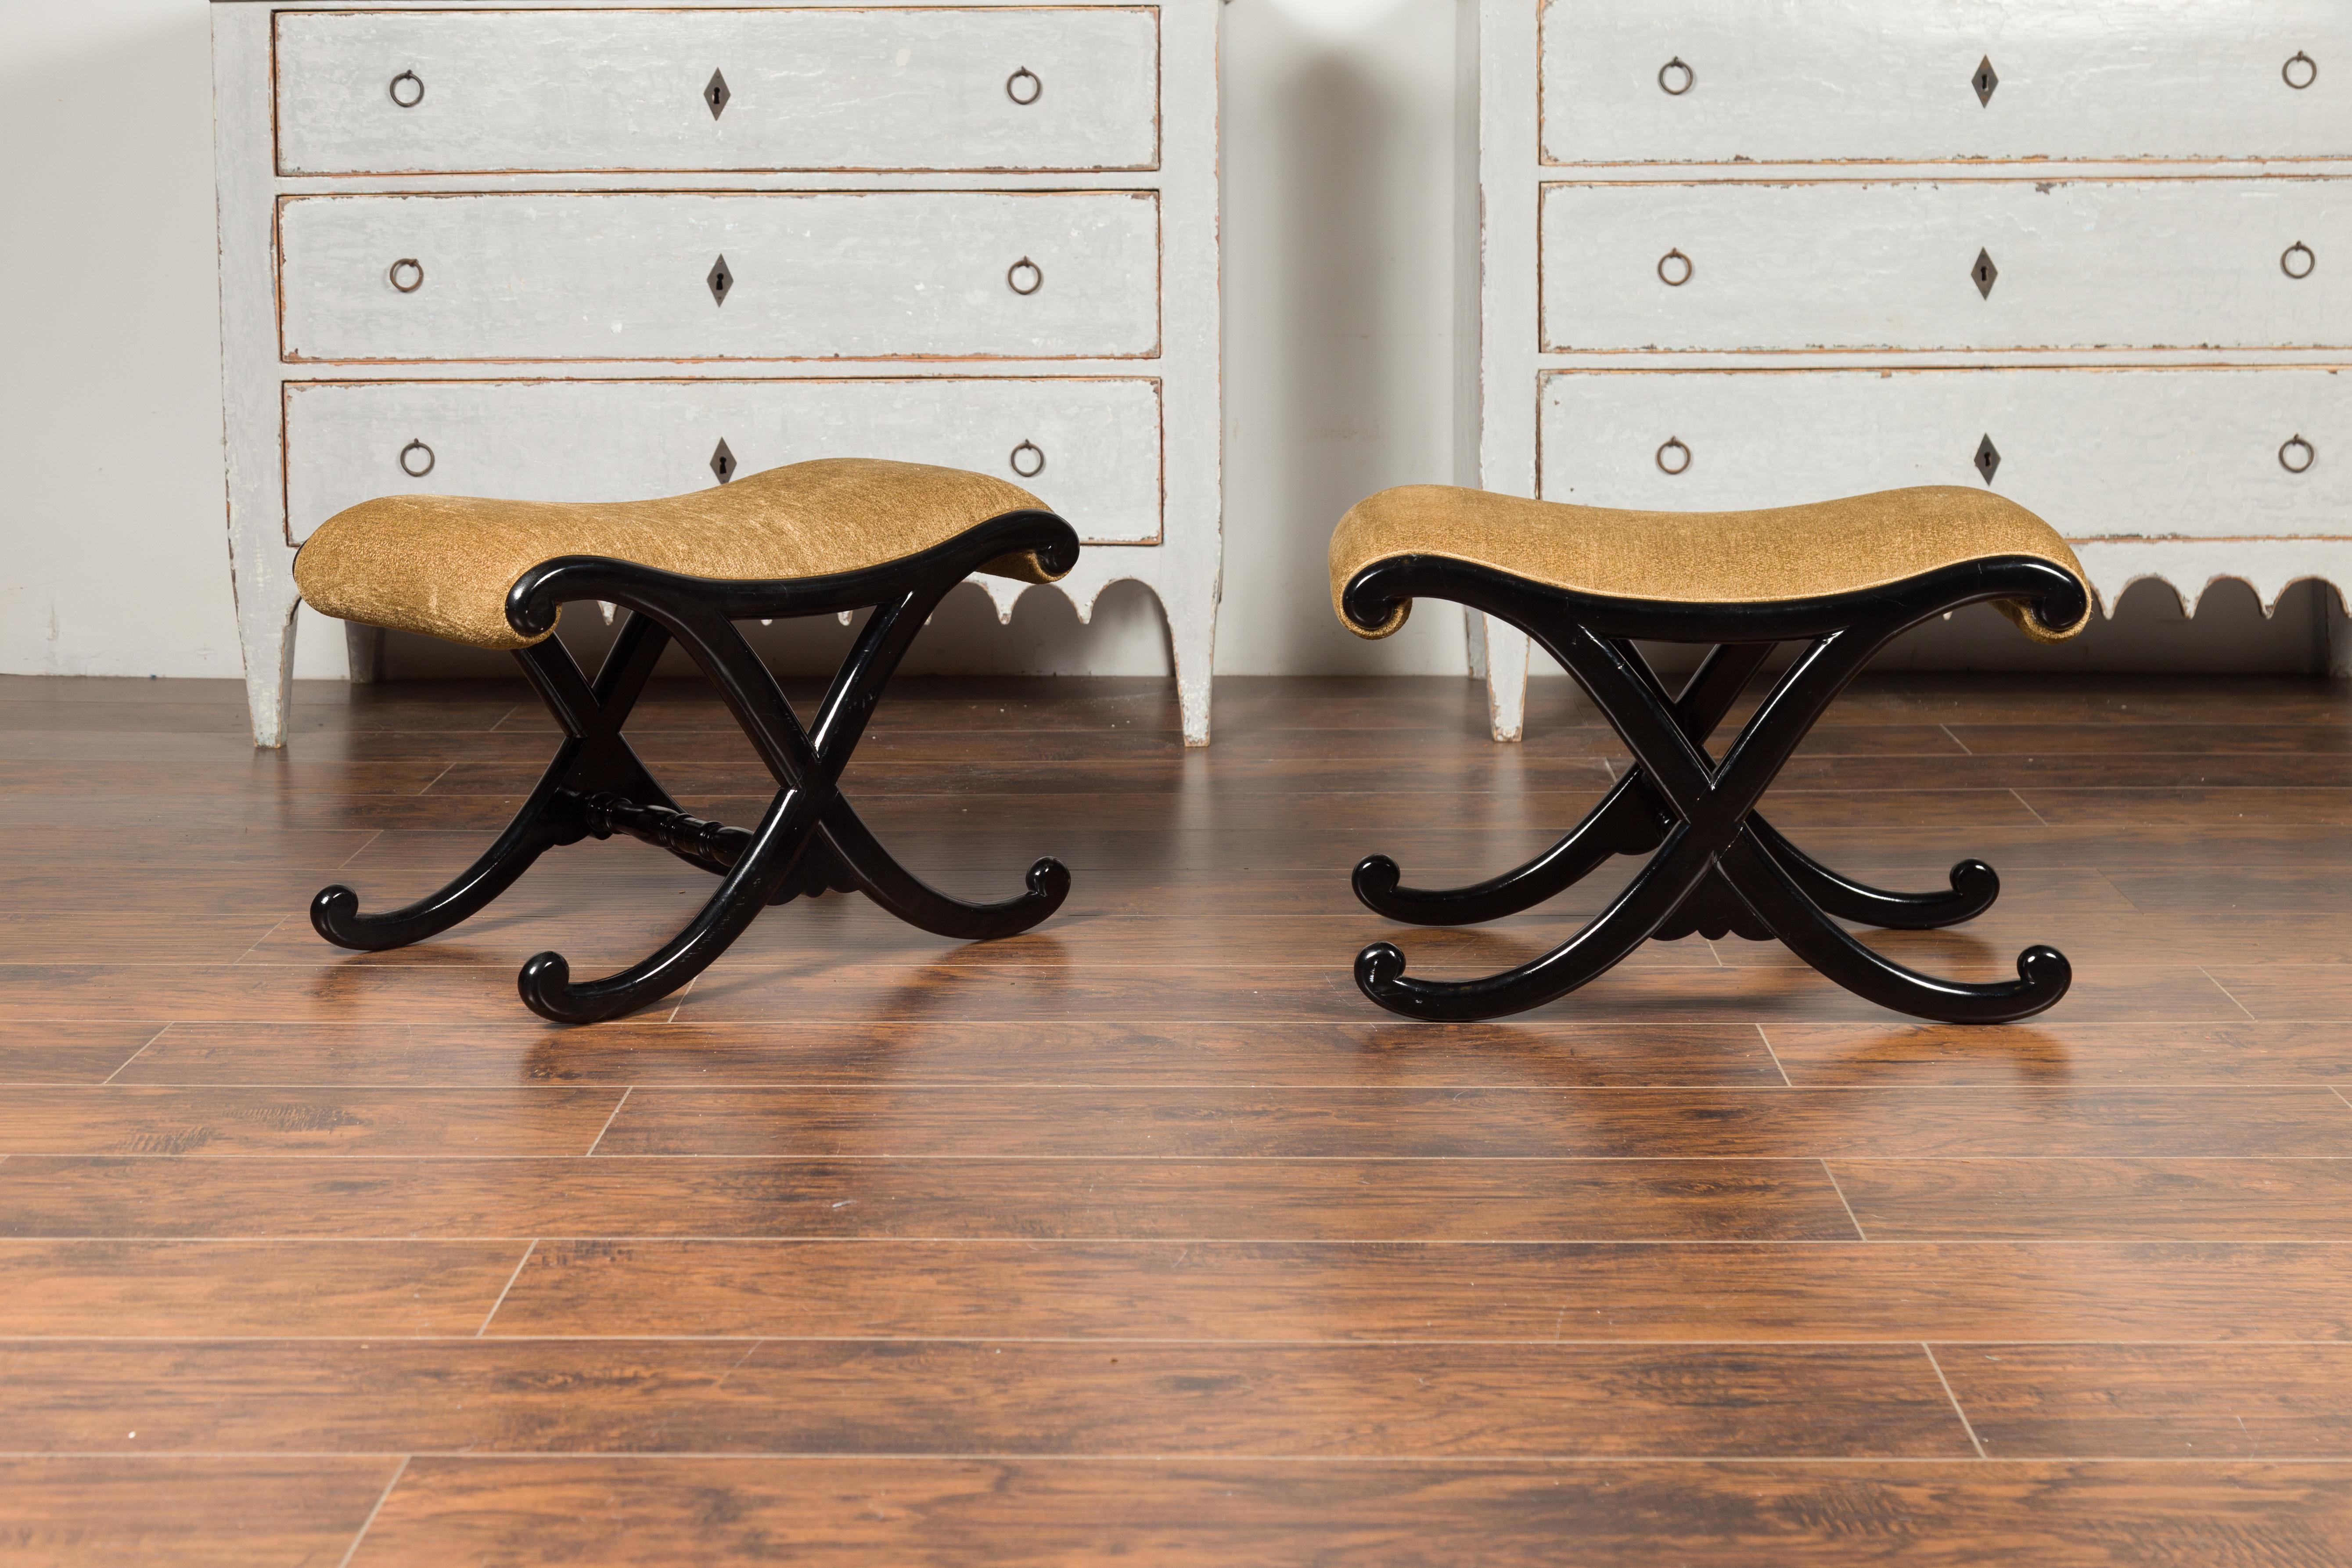 A pair of Italian vintage ebonized wood stools from the mid-20th century, with X-form base and upholstered seats. Born in Italy during the mid-century period, each of this pair of stools features a curving top covered with a tan colored upholstery,